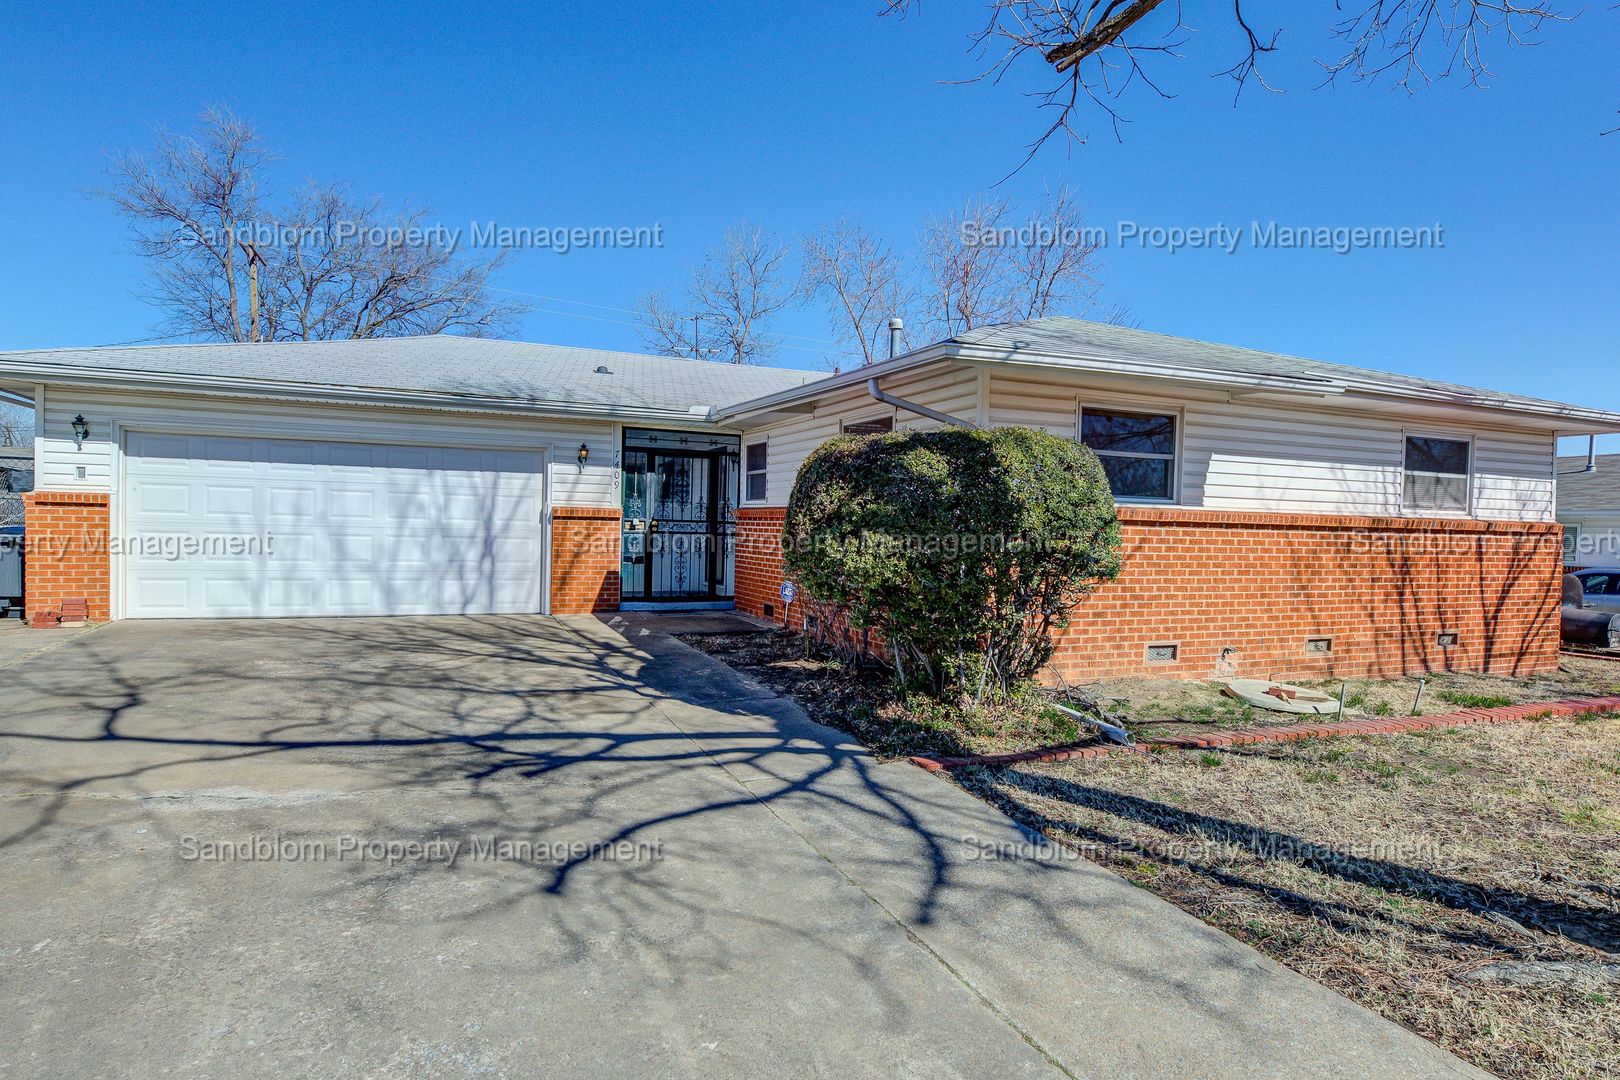 FOR LEASE | Tulsa | $1250 Rent | 3 Bed, 1.5 Bath Home